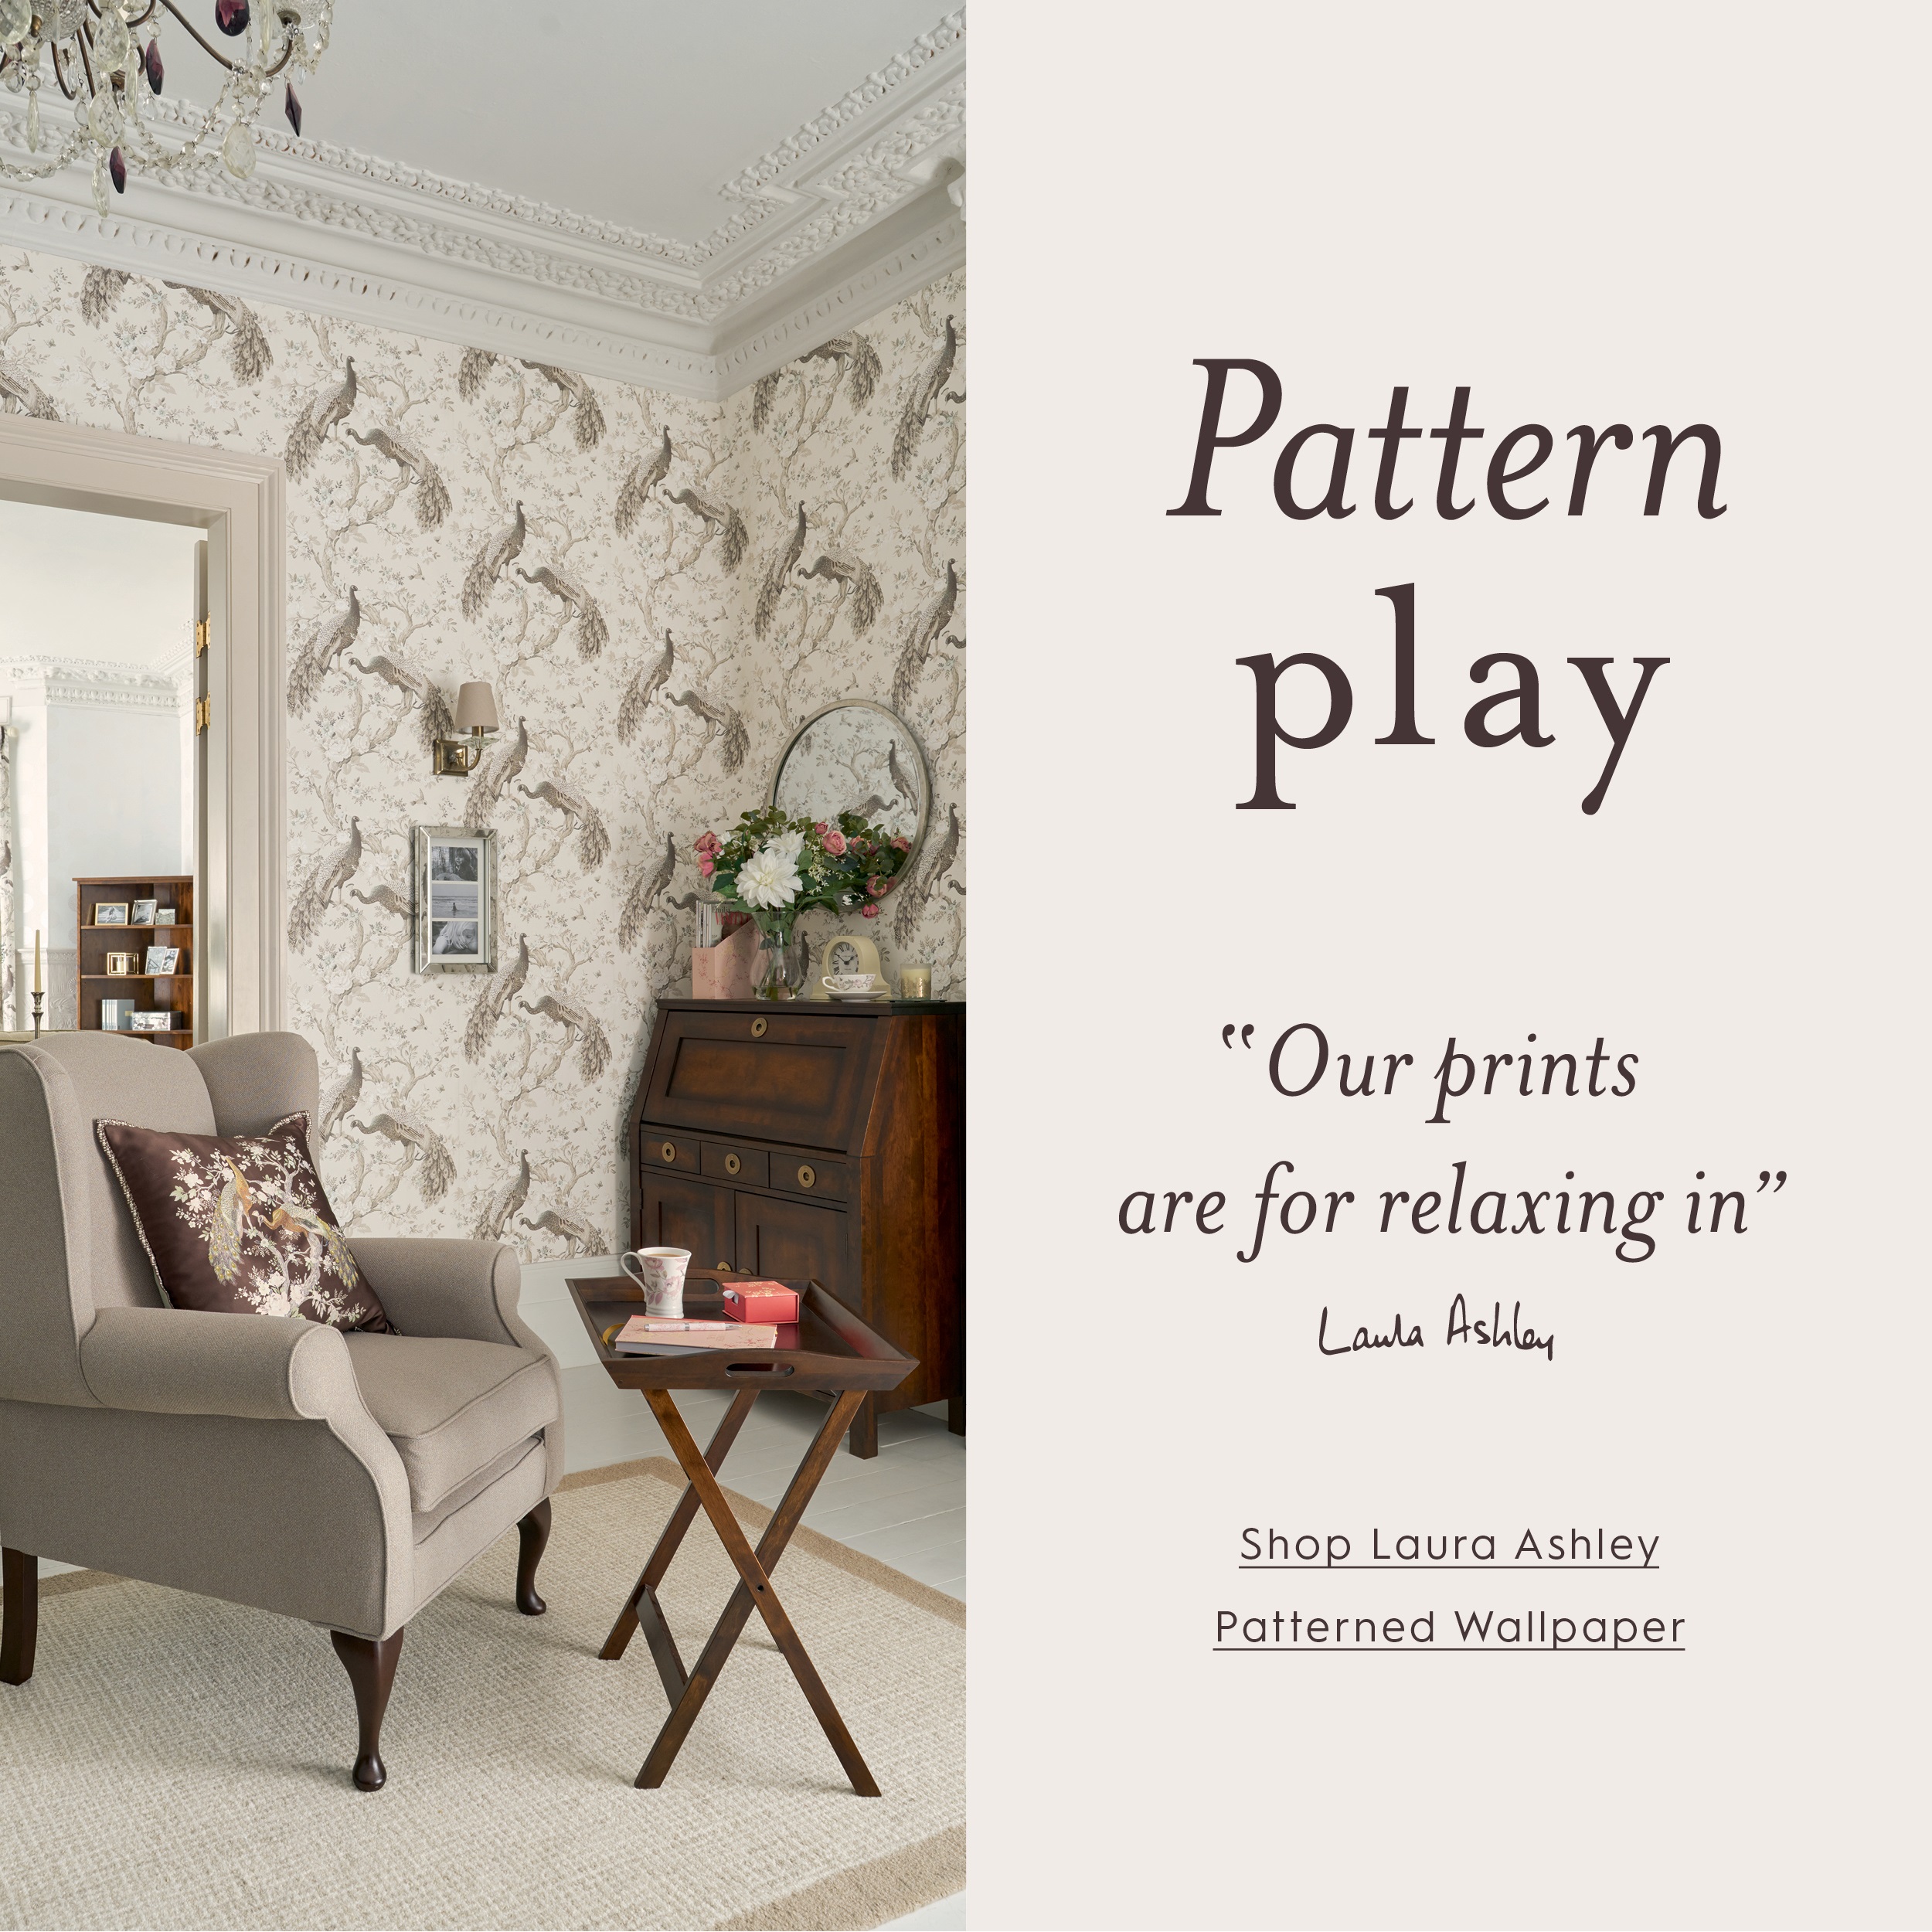 Pattern play ''our prints are for relaxing in'' - Laura Ashley. Shop Laura Ashley Patterned Wallpaper.